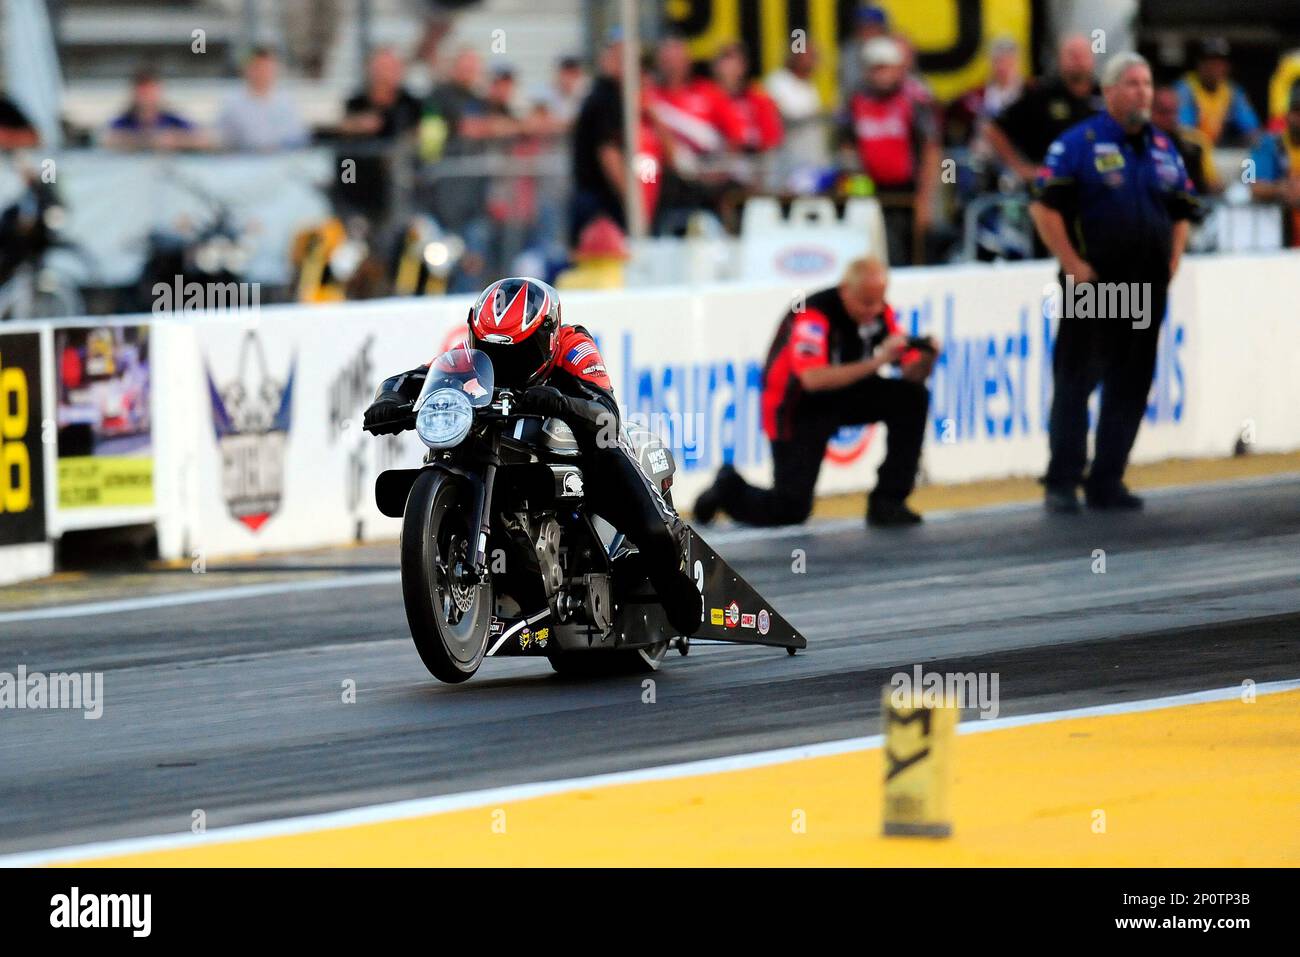 23 September 2016: Eddie Krawiec (2 PSM) Harley Davidson V-Rod NHRA Pro  Stock Motorcycle during qualifying for the NHRA AAA Insurance Midwest  Nationals at Gateway Motorsports Park in Madison, Illinois. (Photo by